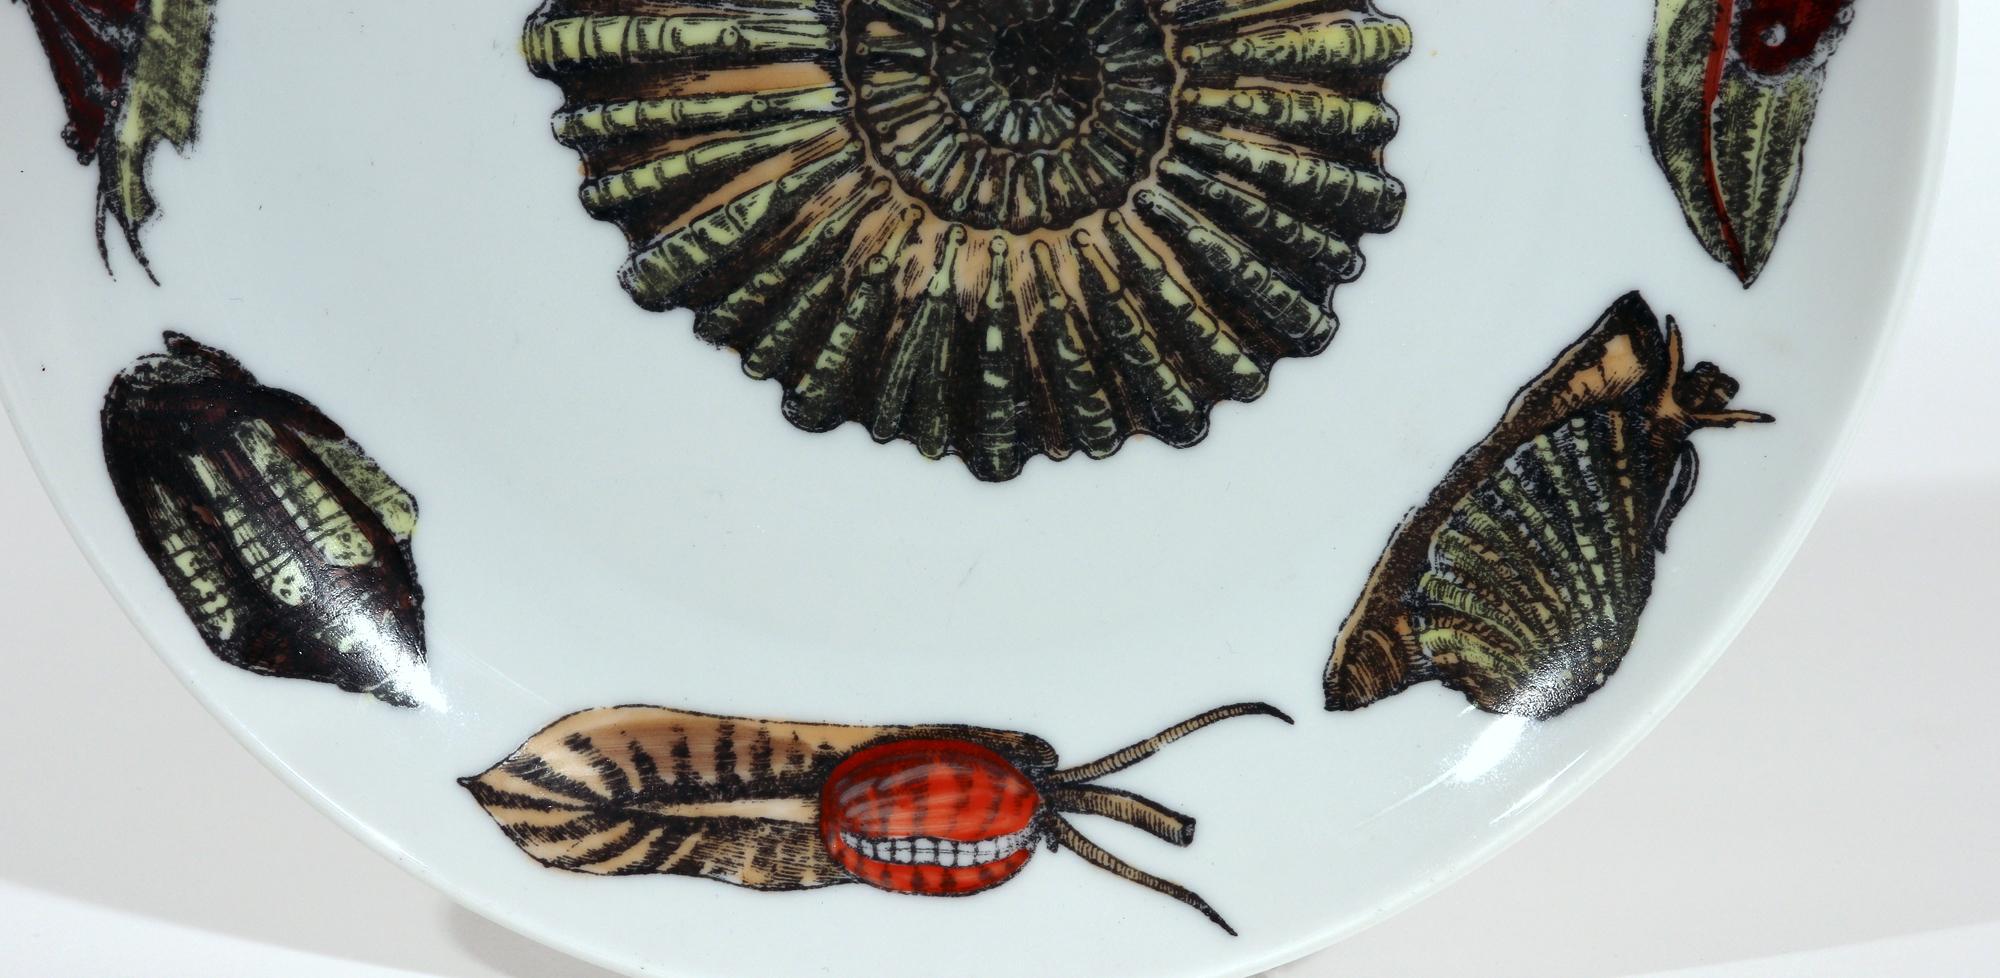 Mid-Century Modern Piero Fornasetti Porcelain Conchiglie Seashell Plate With Snails and Mollusks For Sale